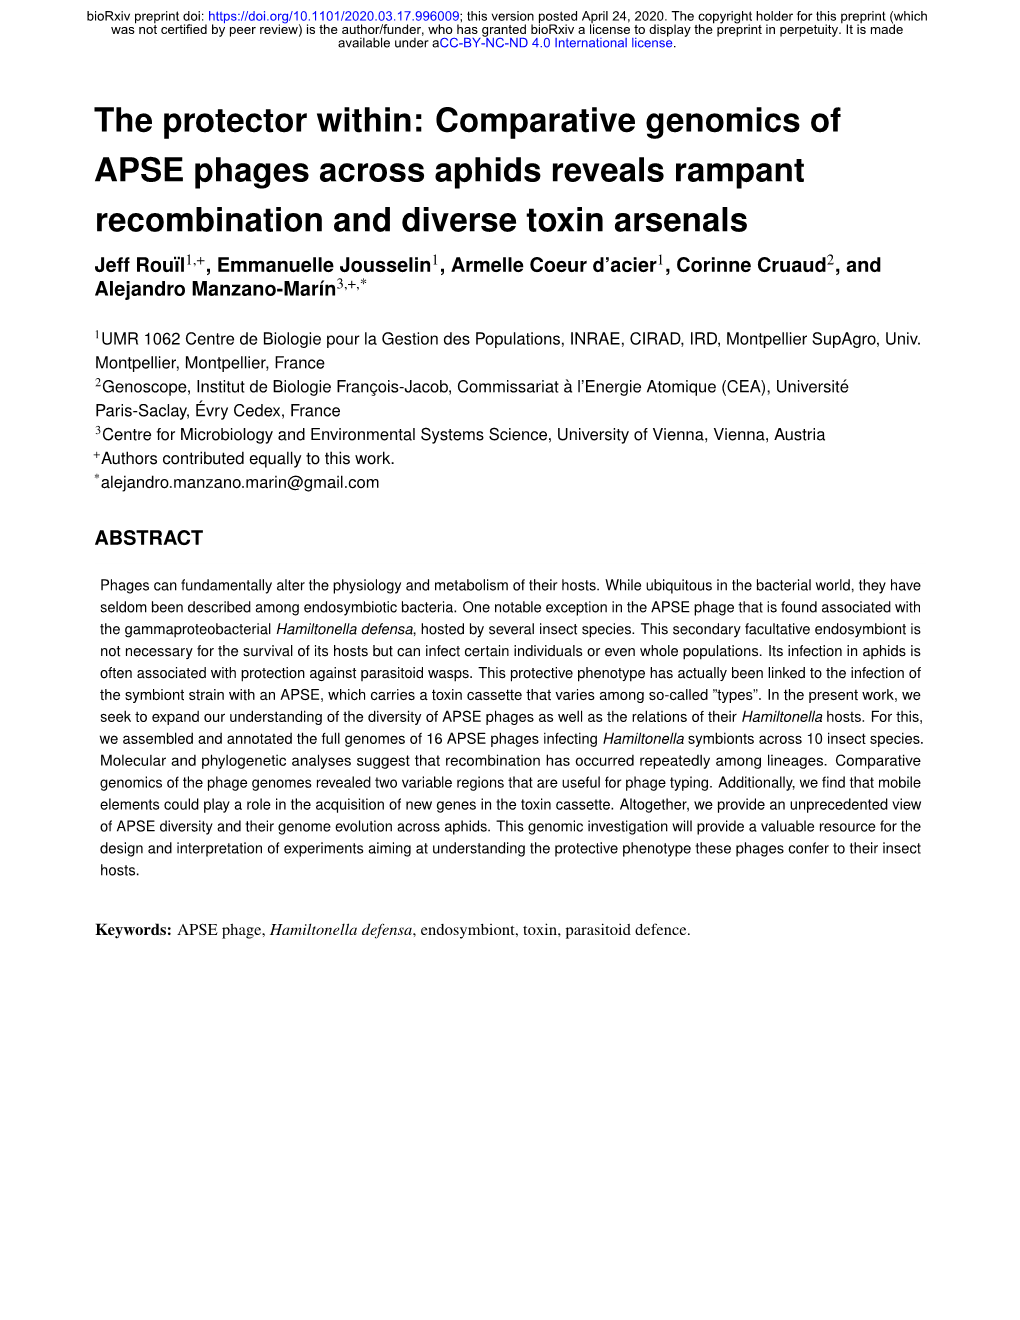 Comparative Genomics of APSE Phages Across Aphids